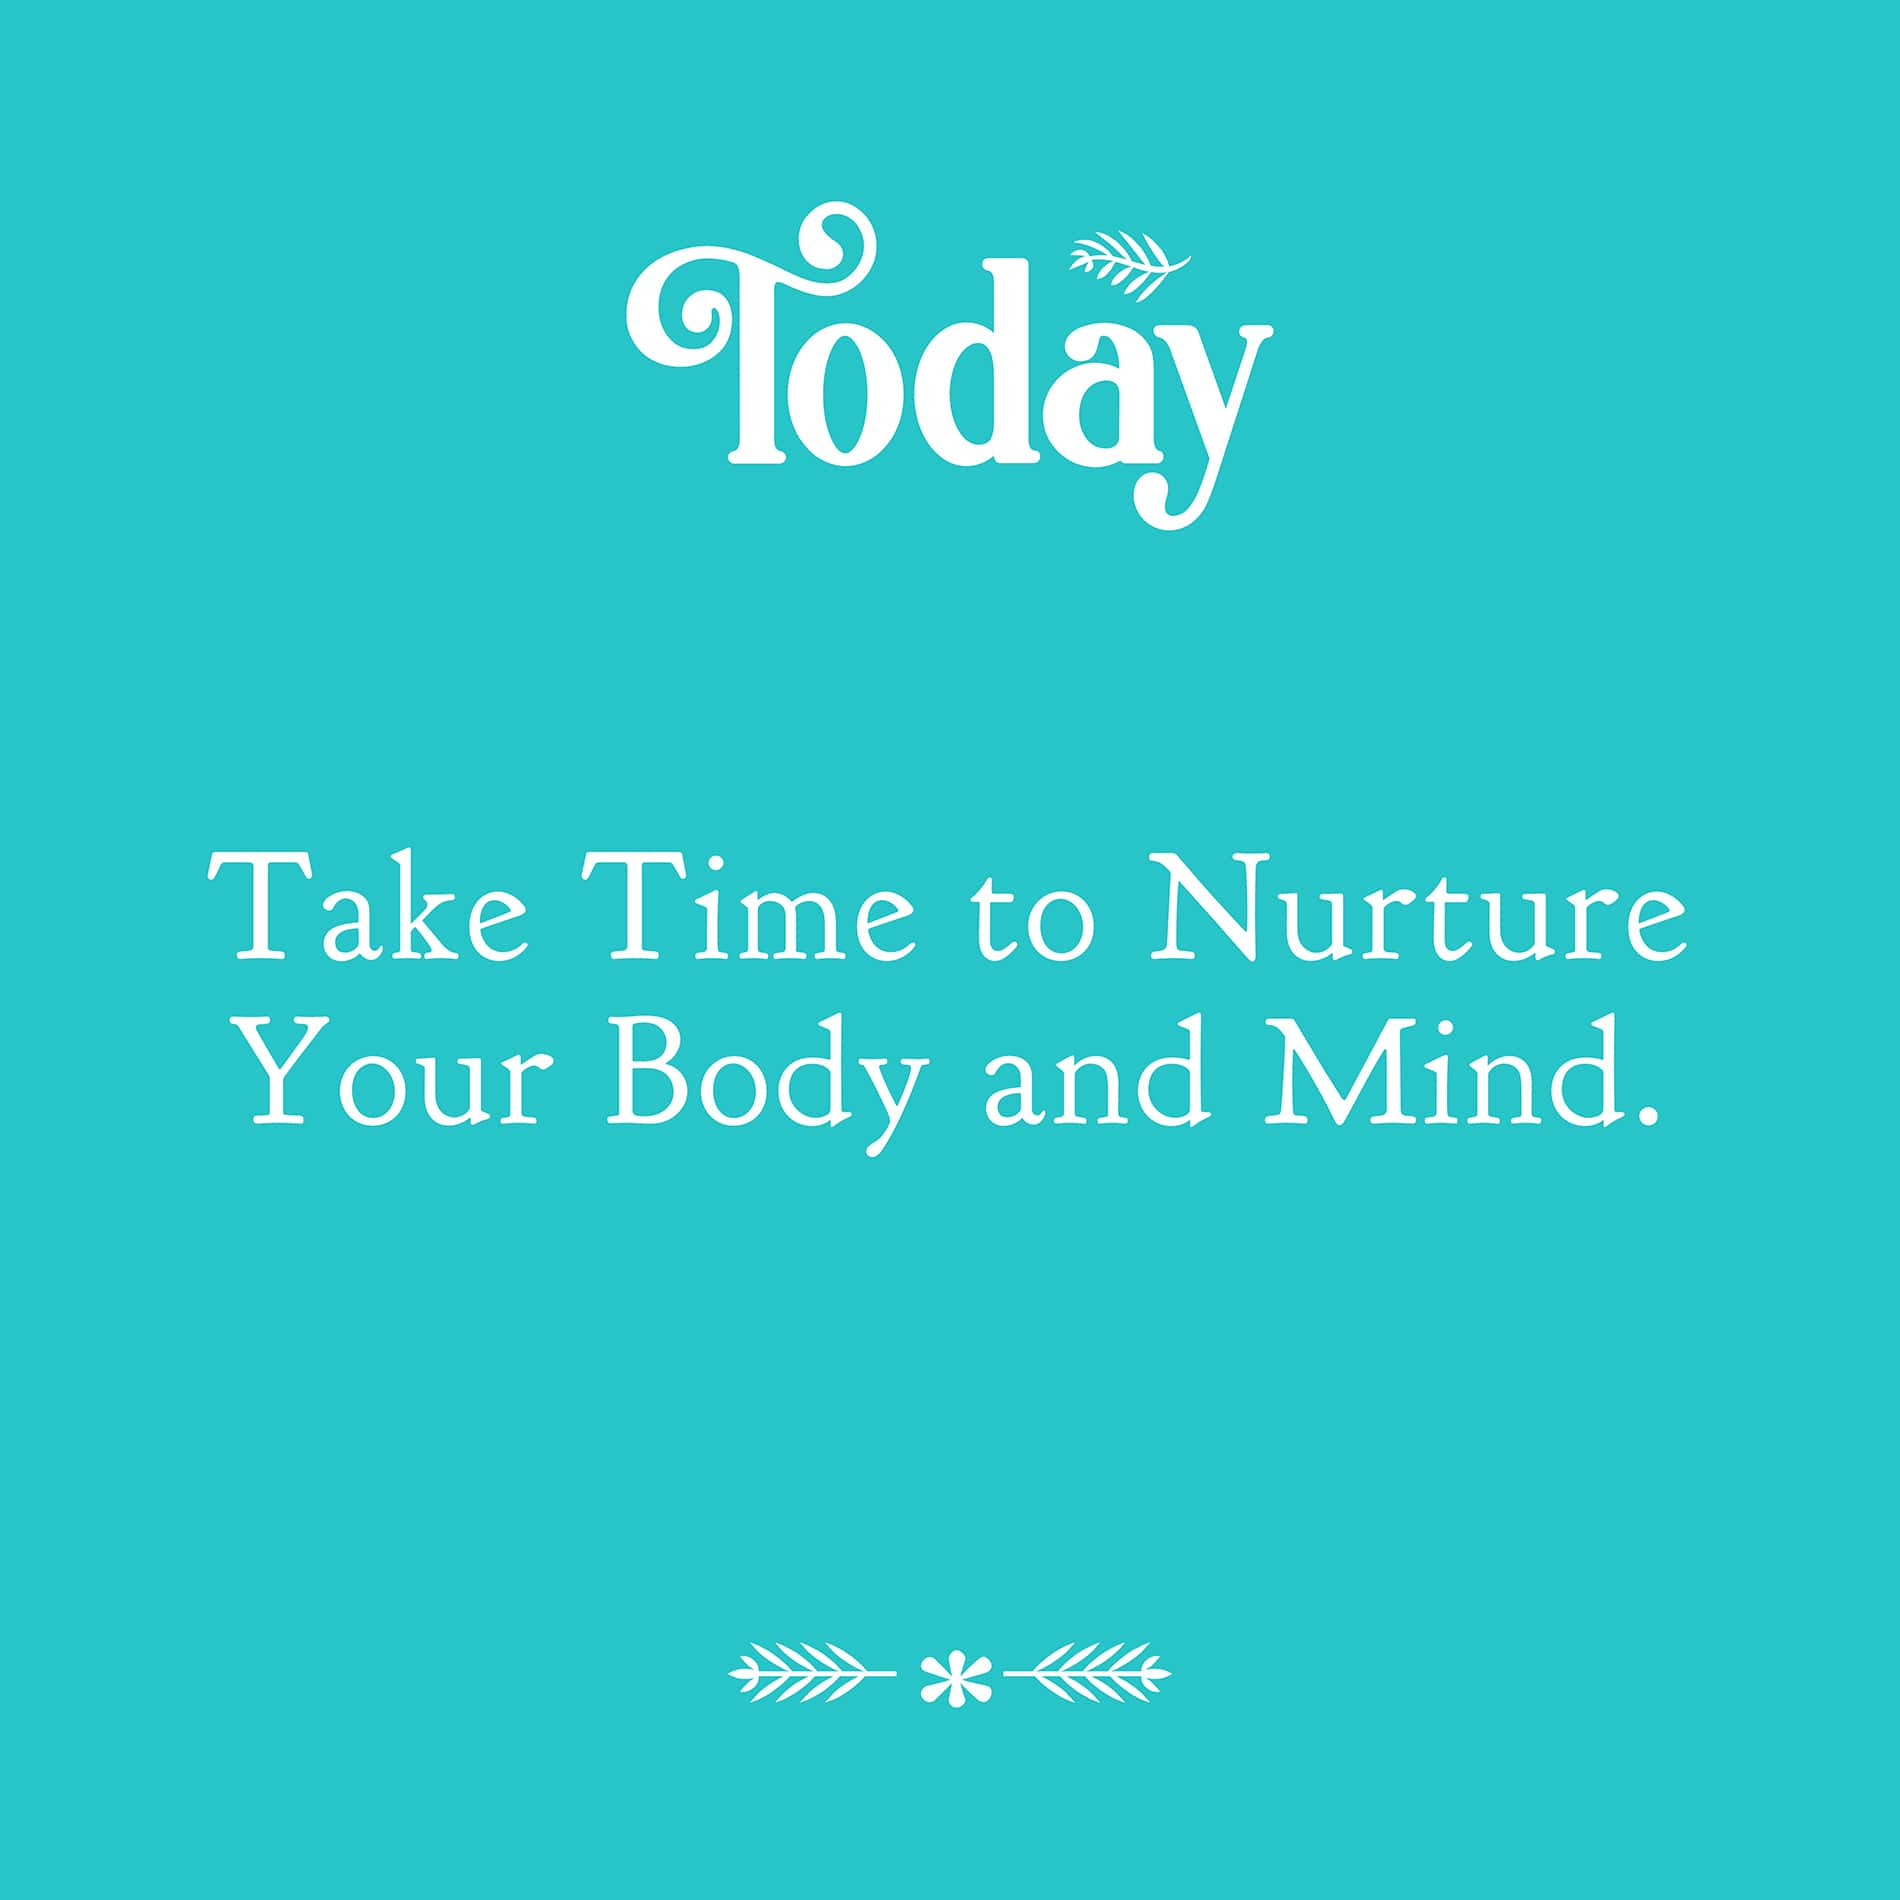 Today - Take time to nurture your body and mind